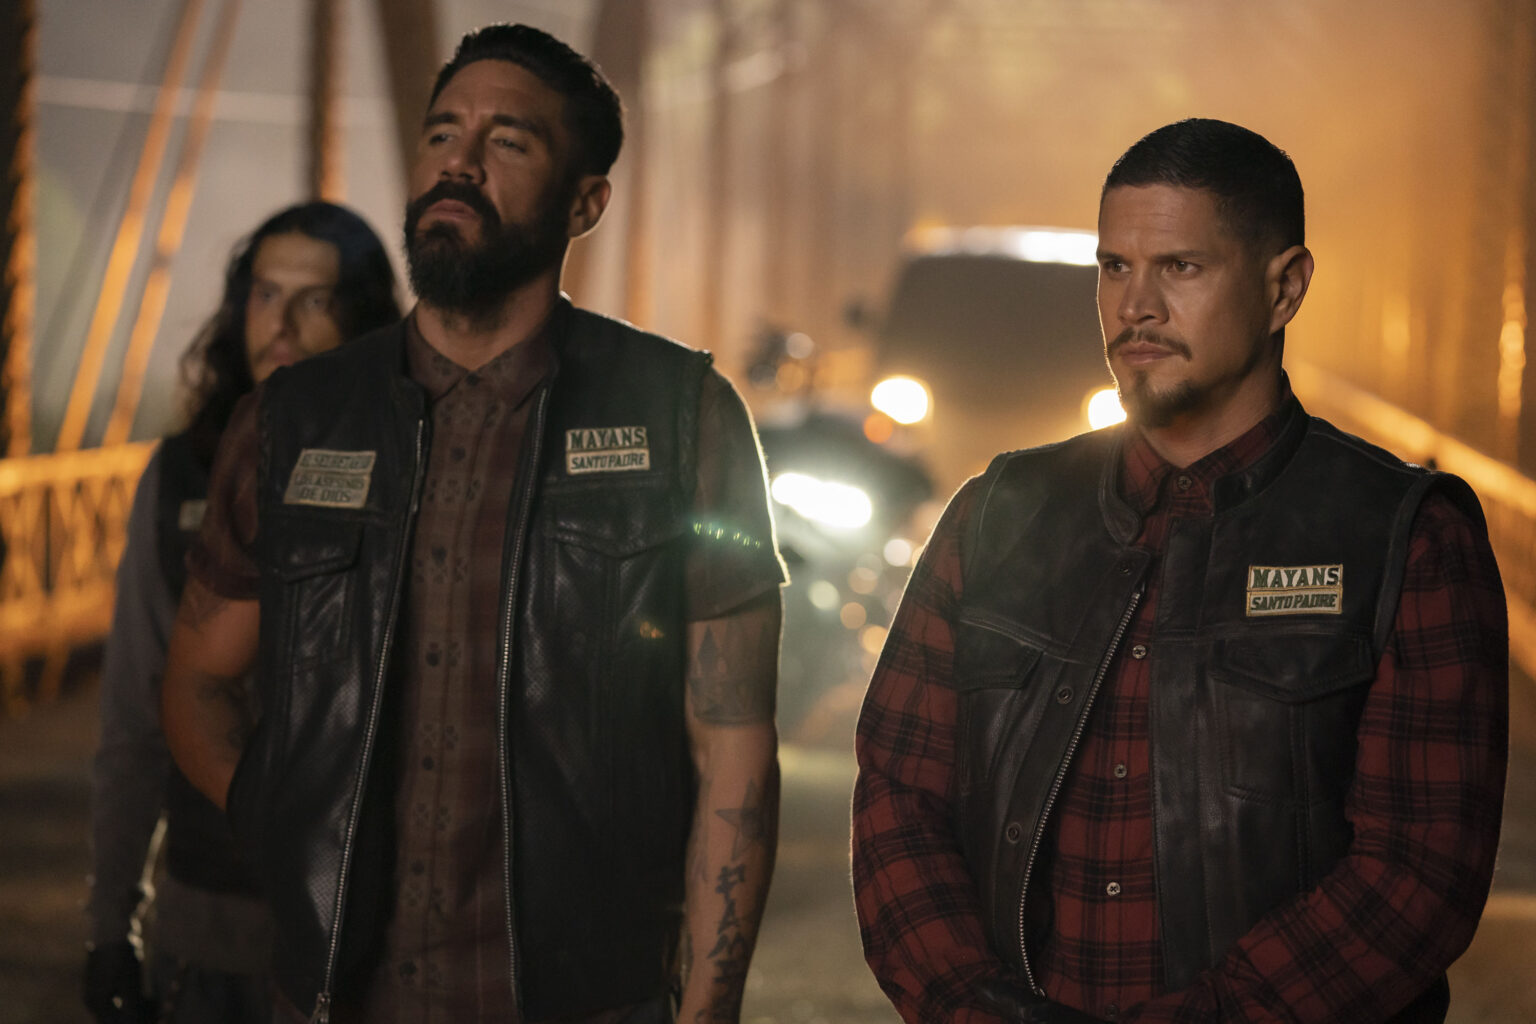 Mayans M.C. Season 4 Has A Release Date, Plot, Trailer, And News To Be